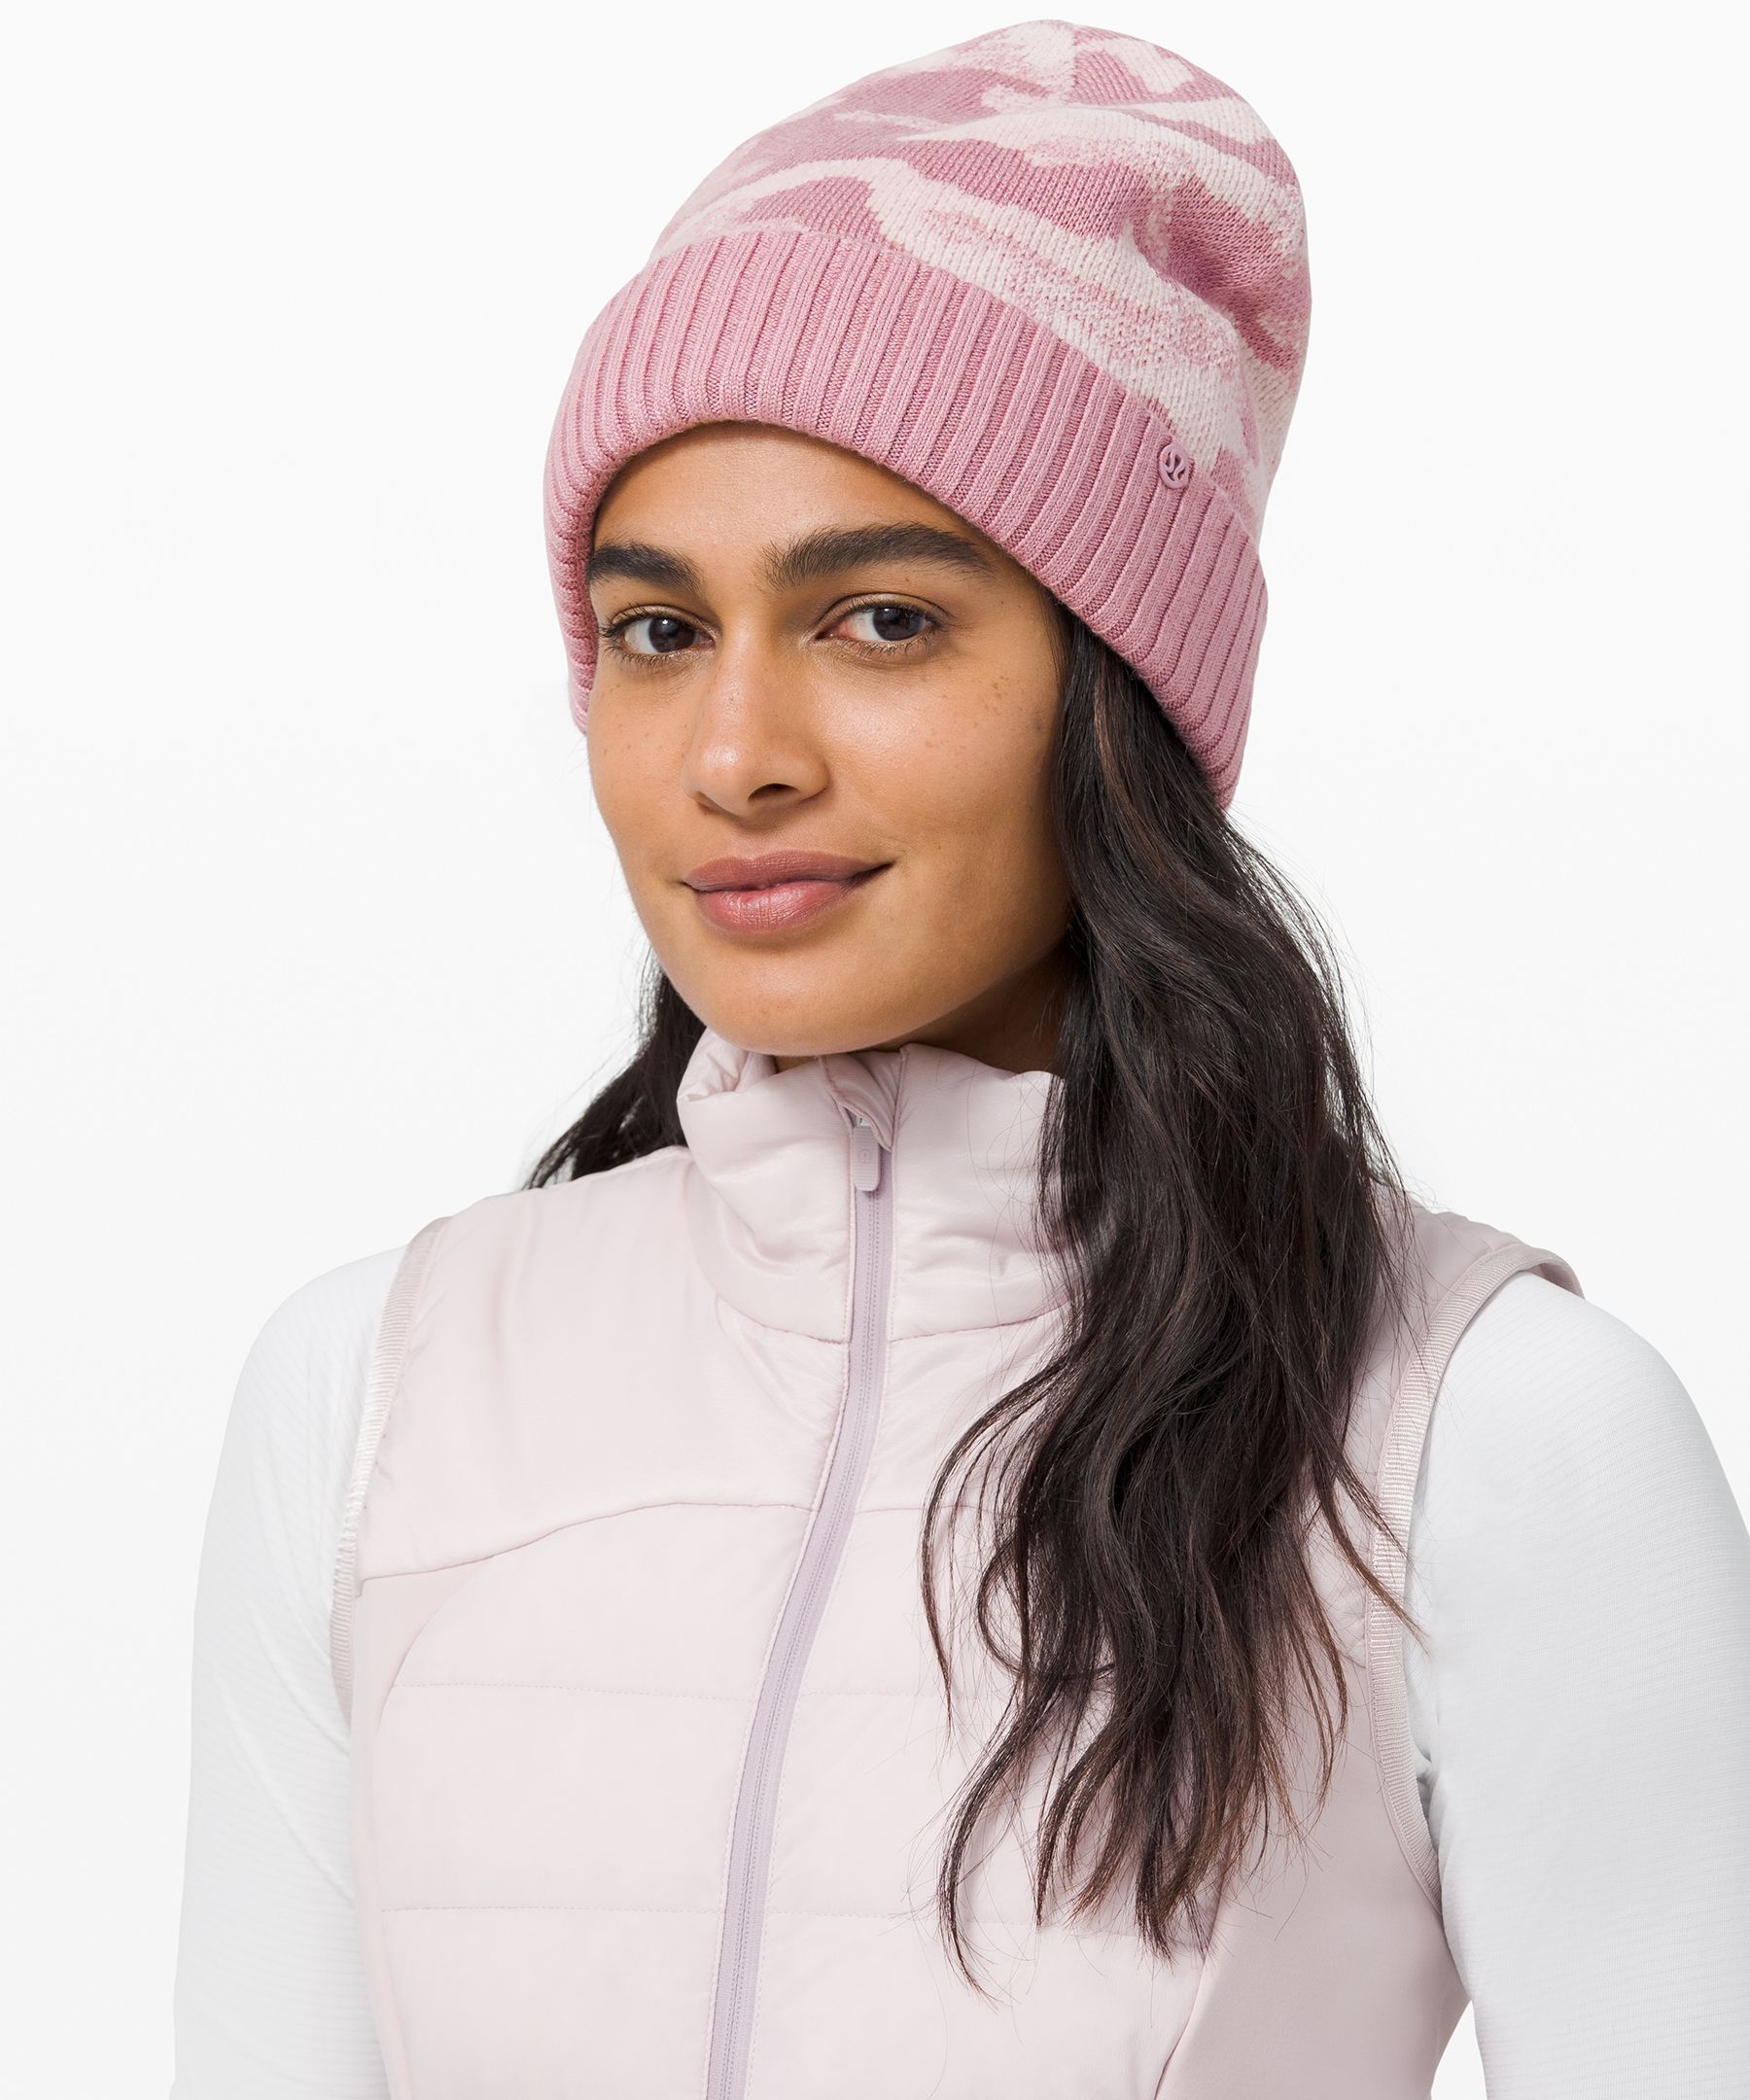 Room for Warmth Beanie | Lululemon (US)